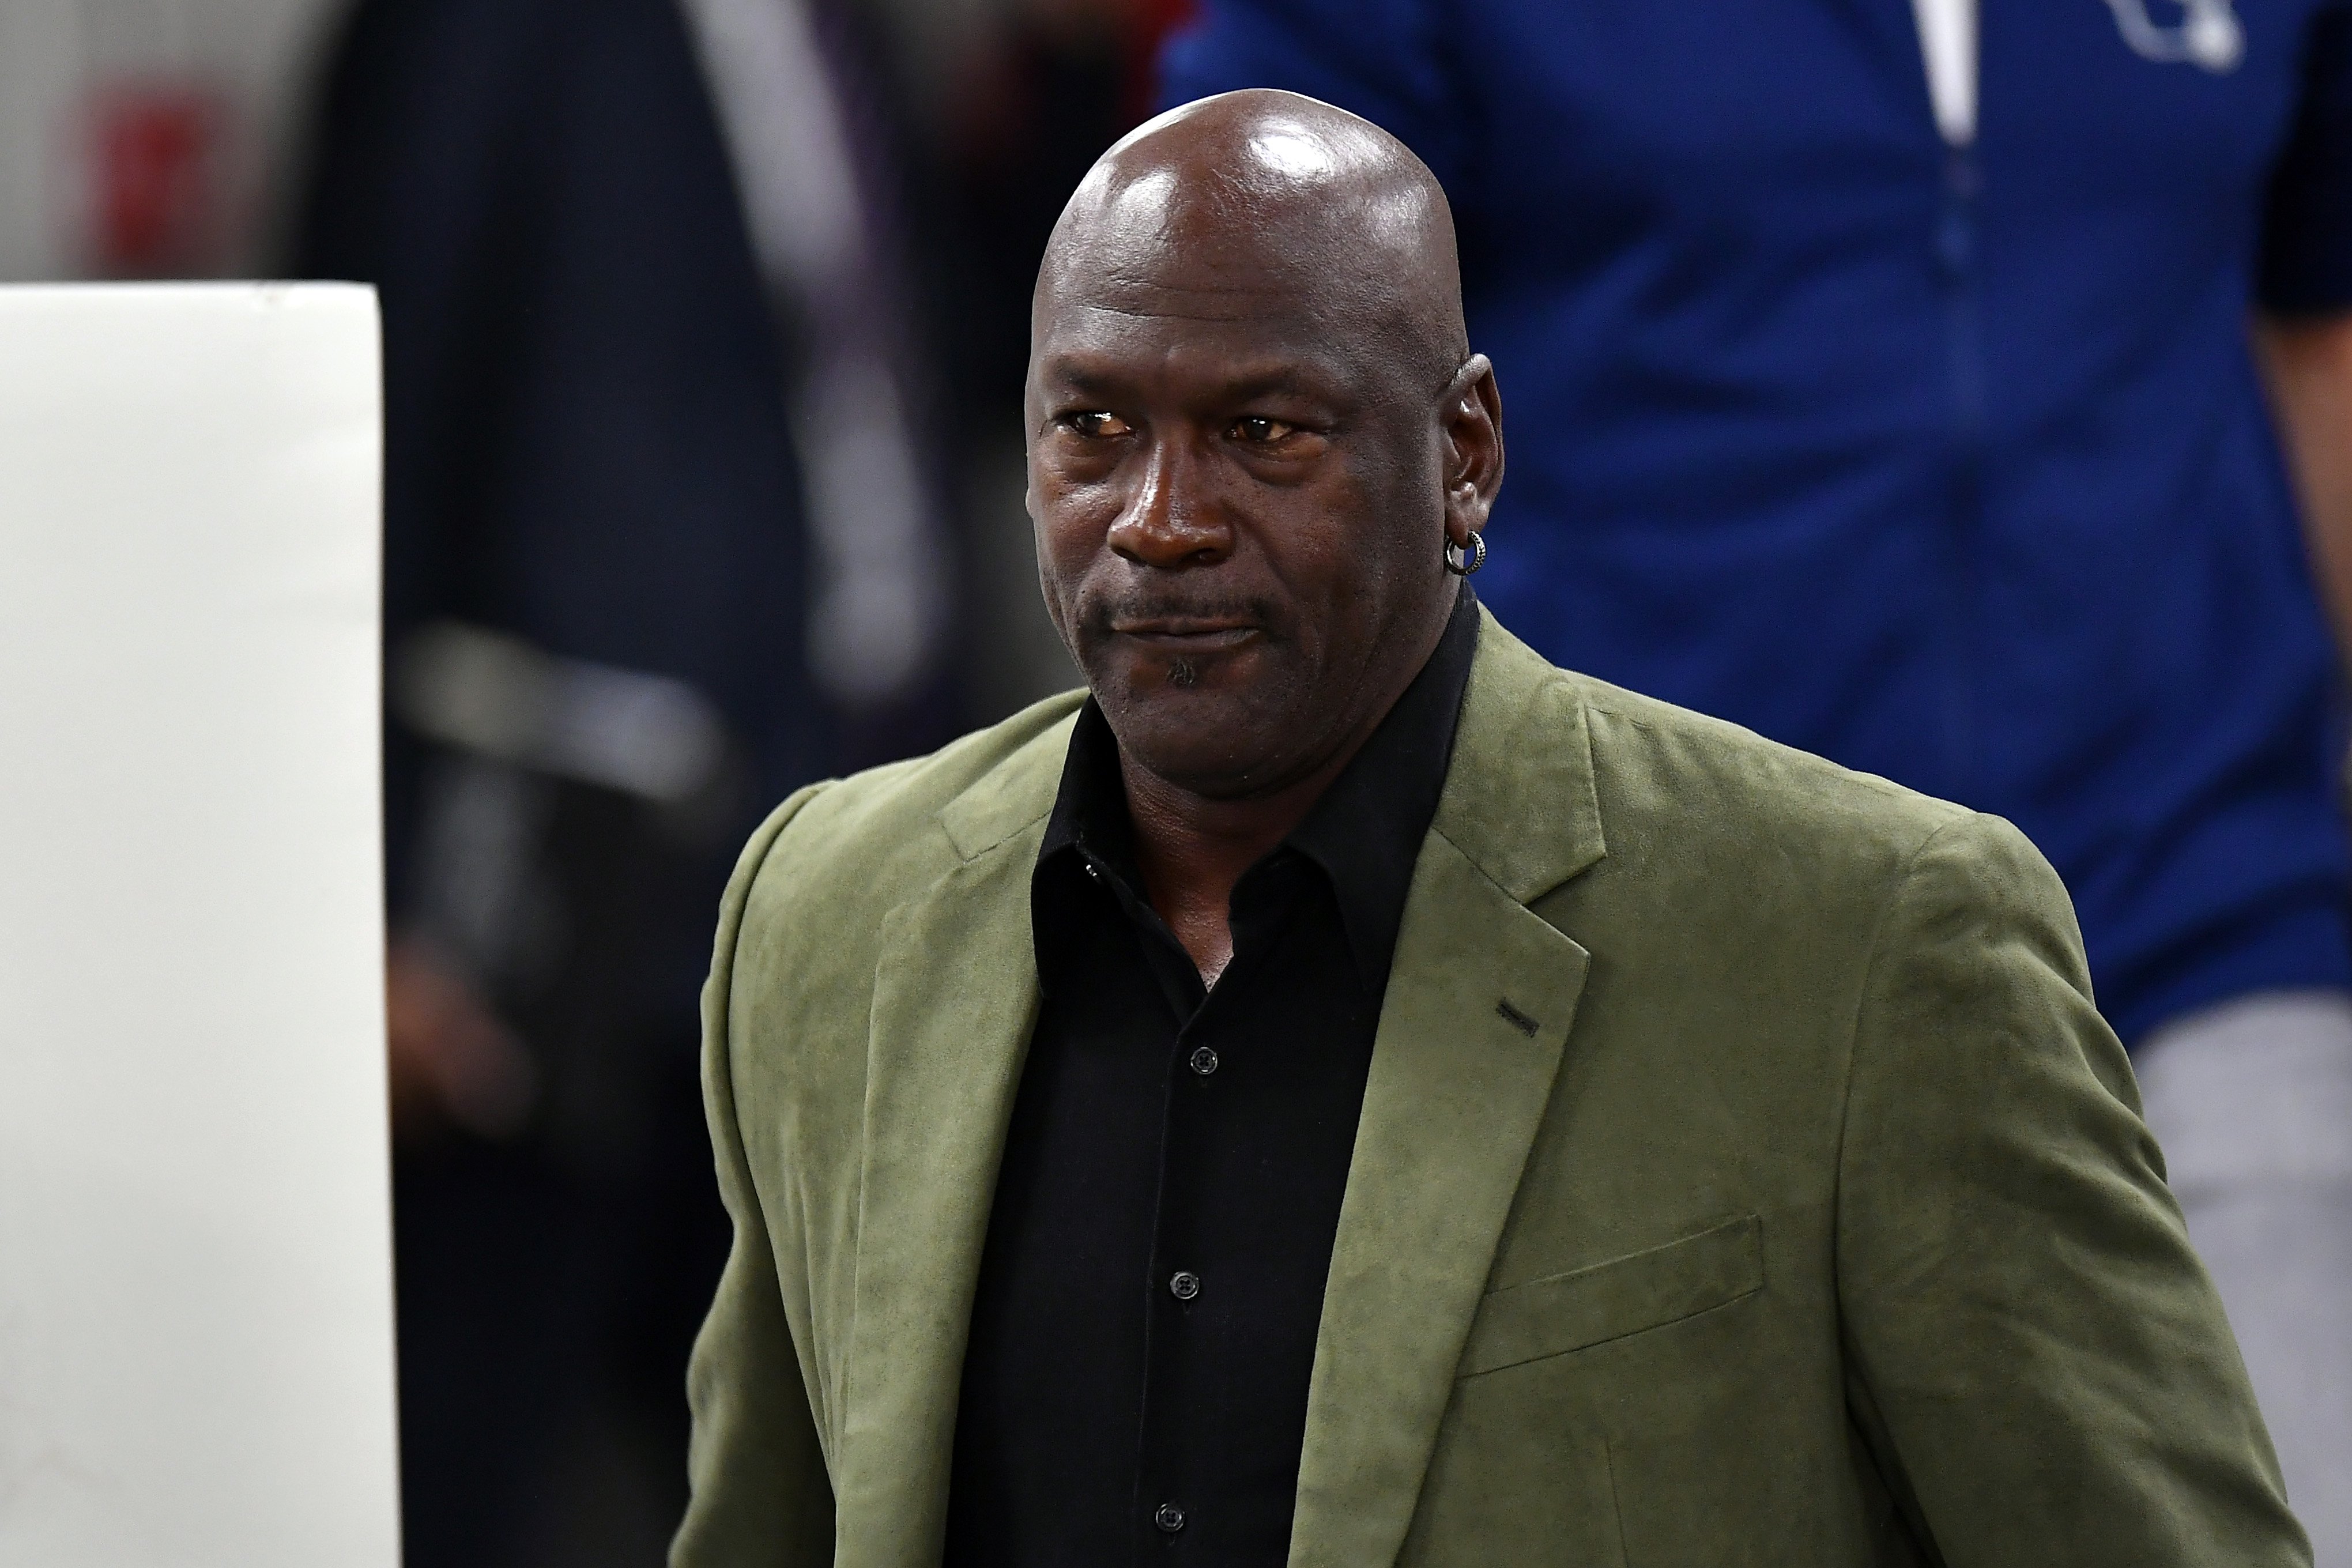 Michael Jordan at a press conference prior to the match between the Charlotte Hornets and Milwaukee Bucks in 2020, France | Source: Getty Images